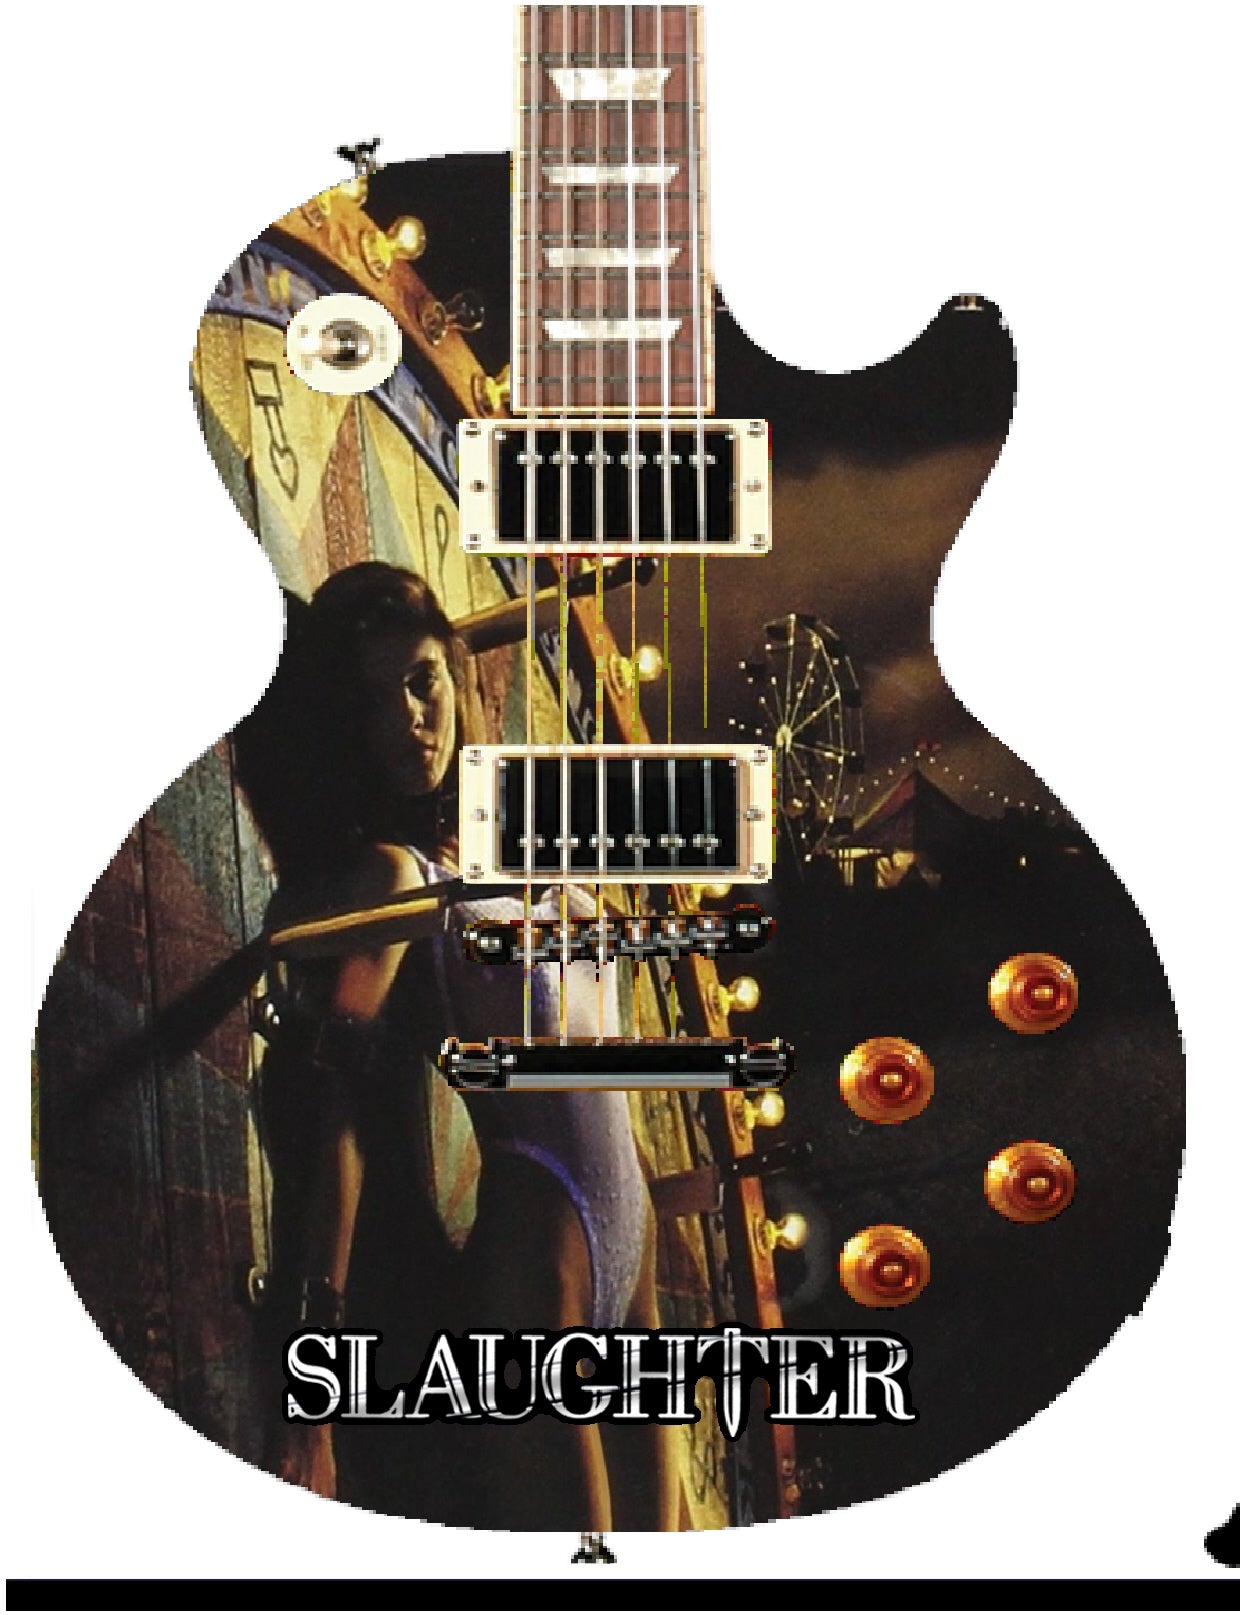 Slaughter Custom Guitar - Zion Graphic Collectibles